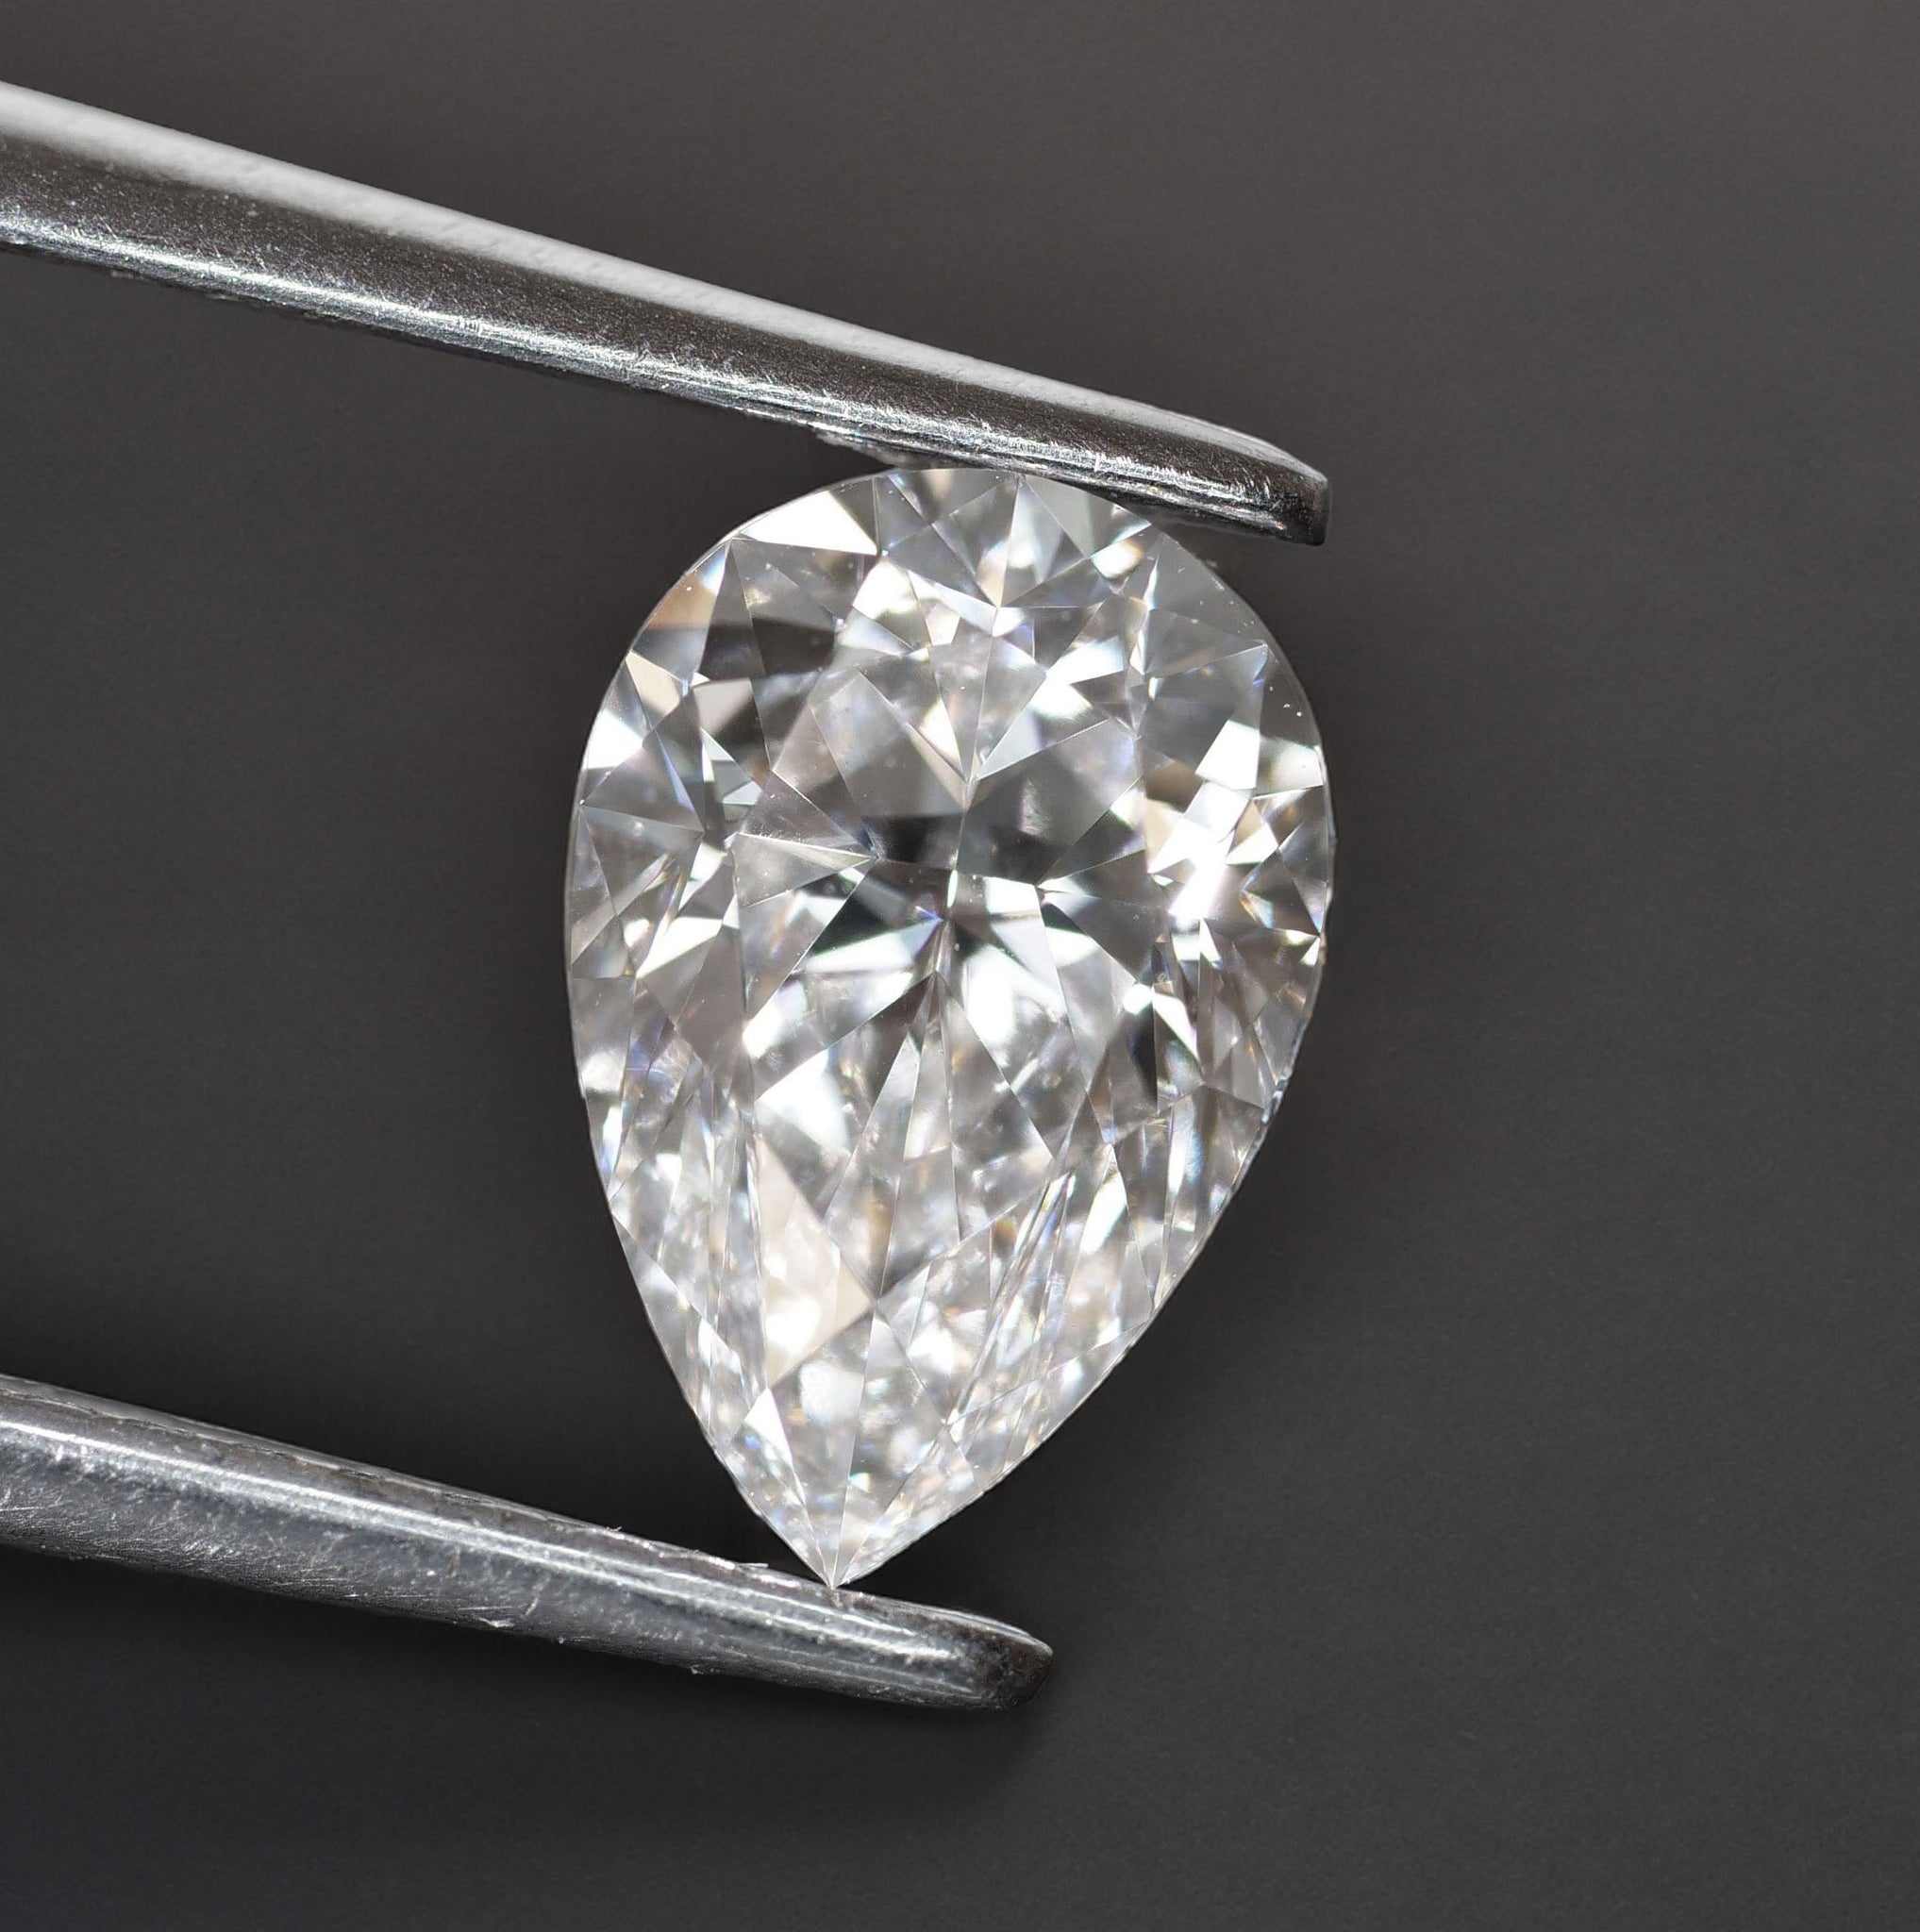 Natural diamond | 1 ct, GIA certified, pear cut 8x5.6 mm, D color, VS1 - Eden Garden Jewelry™